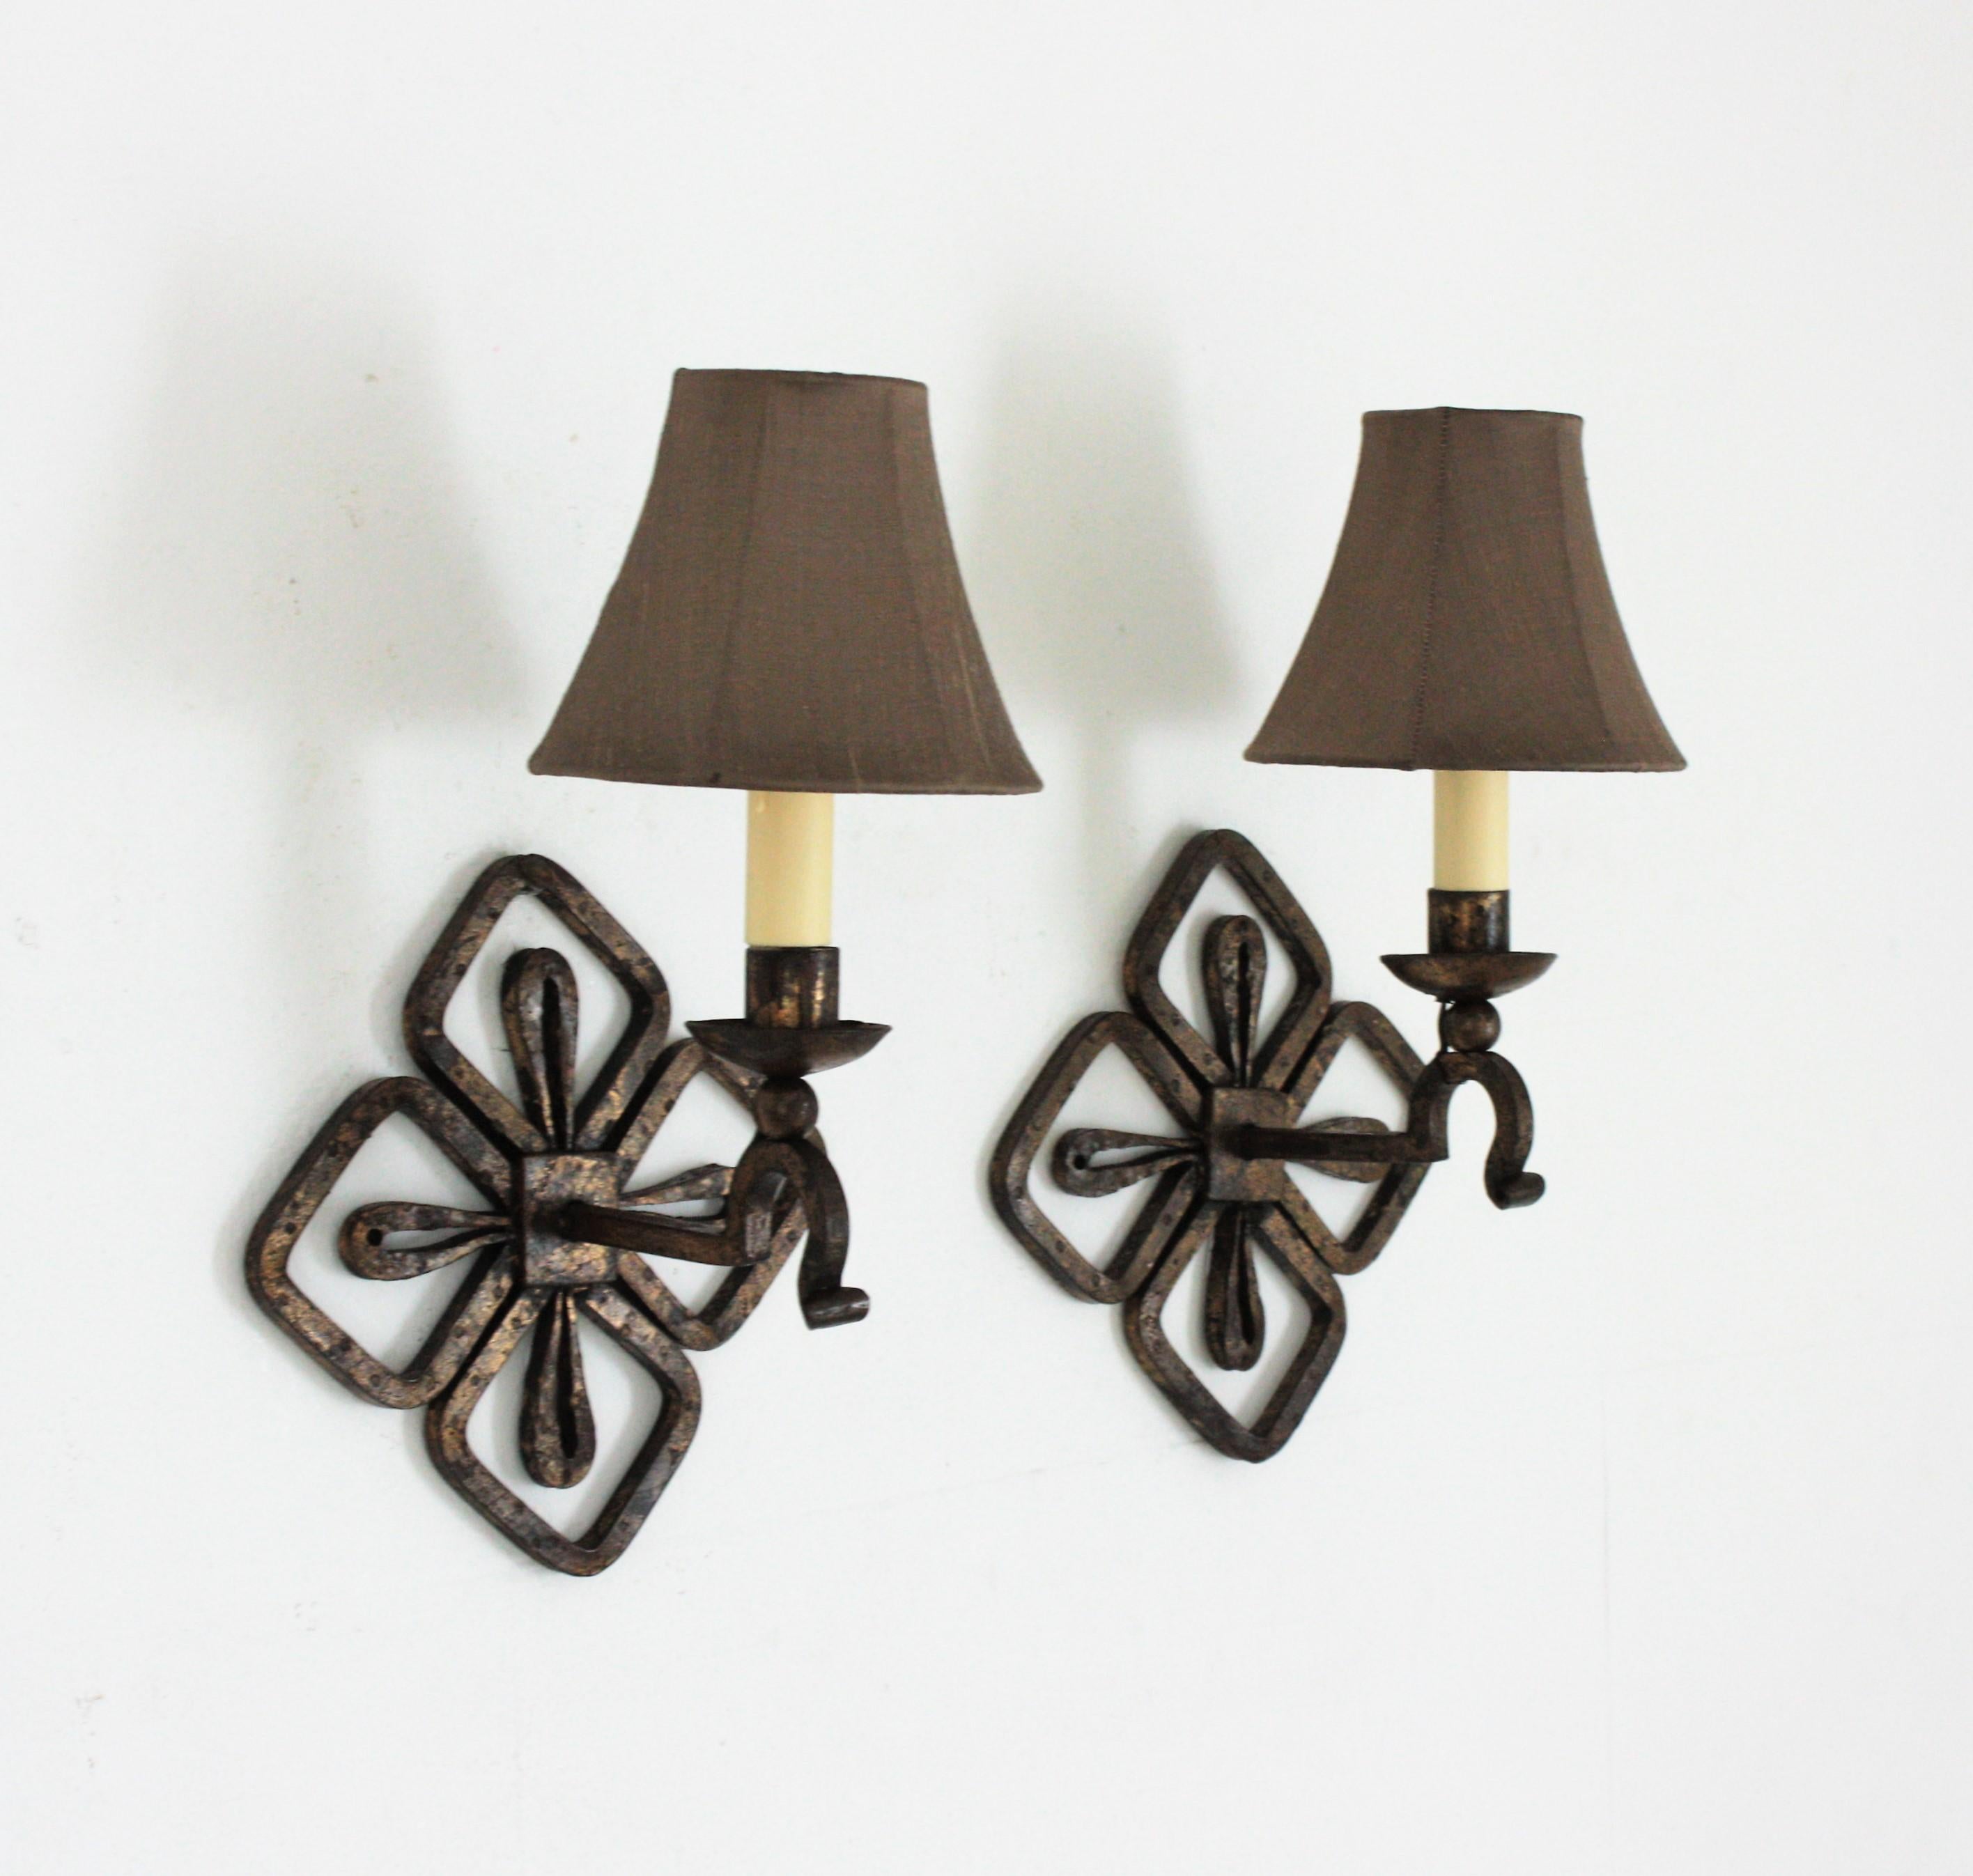 Hollywood Regency Pair of French Parcel Gilt Iron Wall Sconces with Fleur de Lis Design